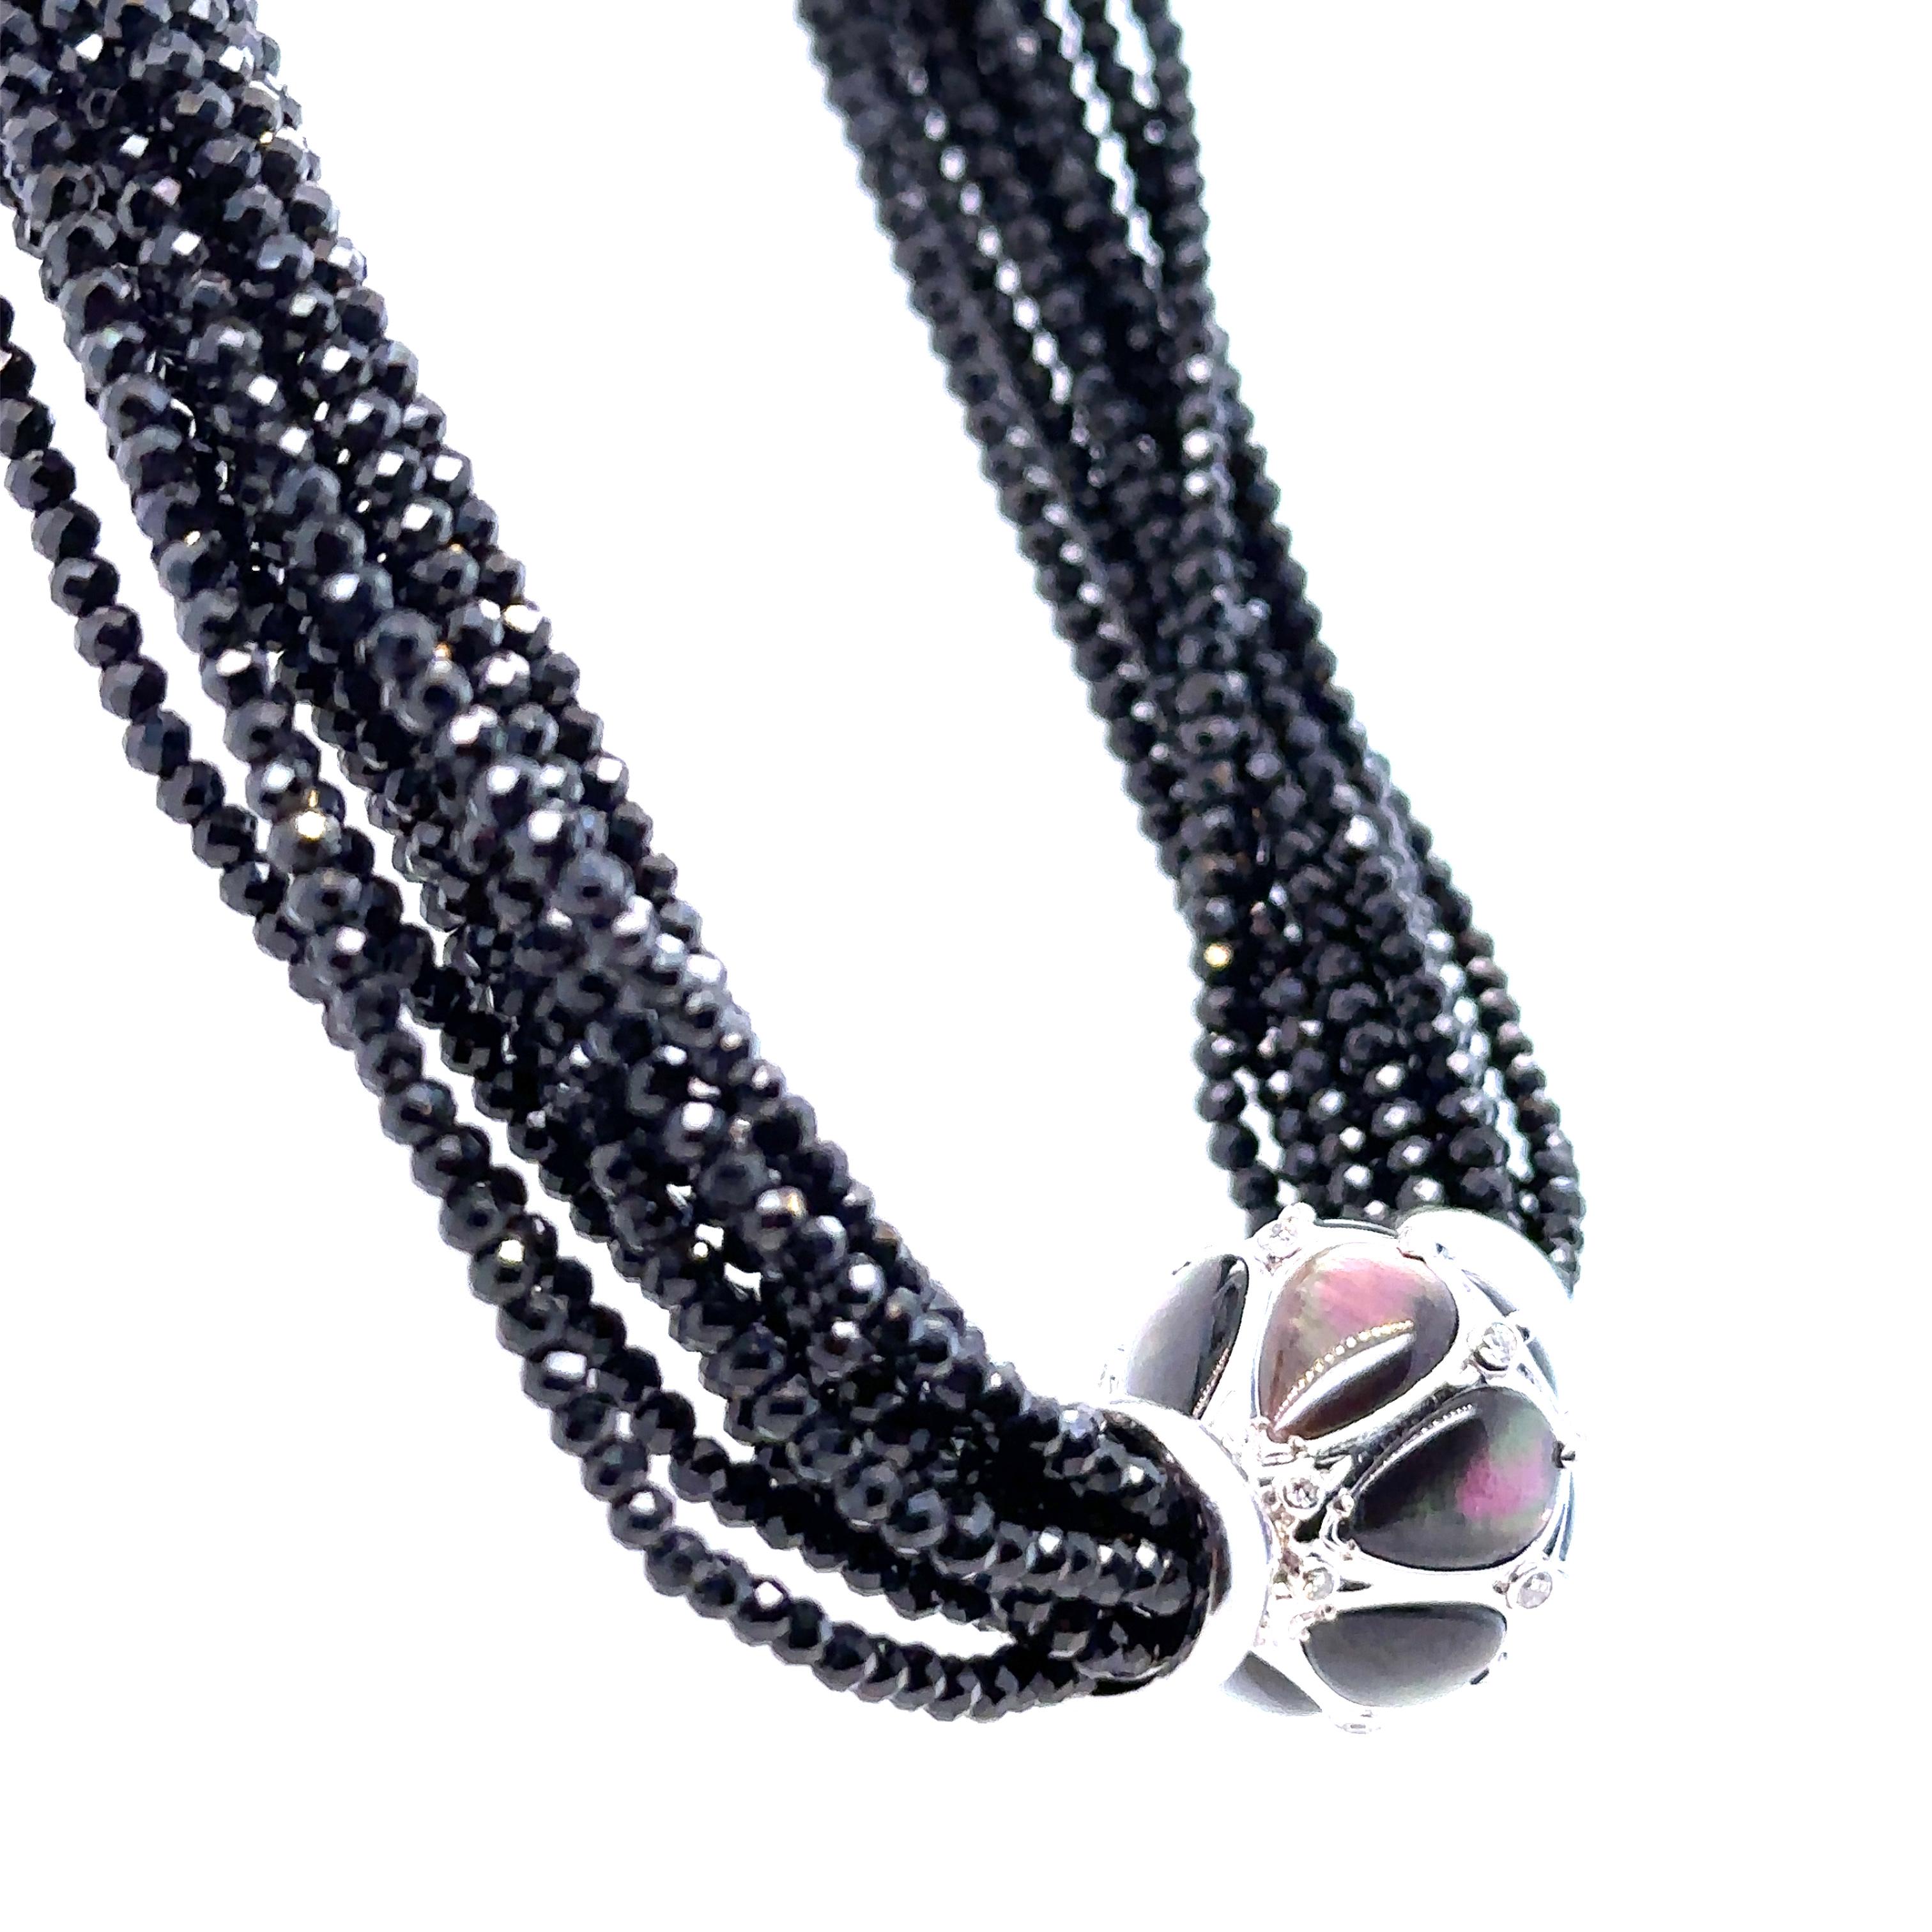 Paspaley Black Spinel Necklace 3